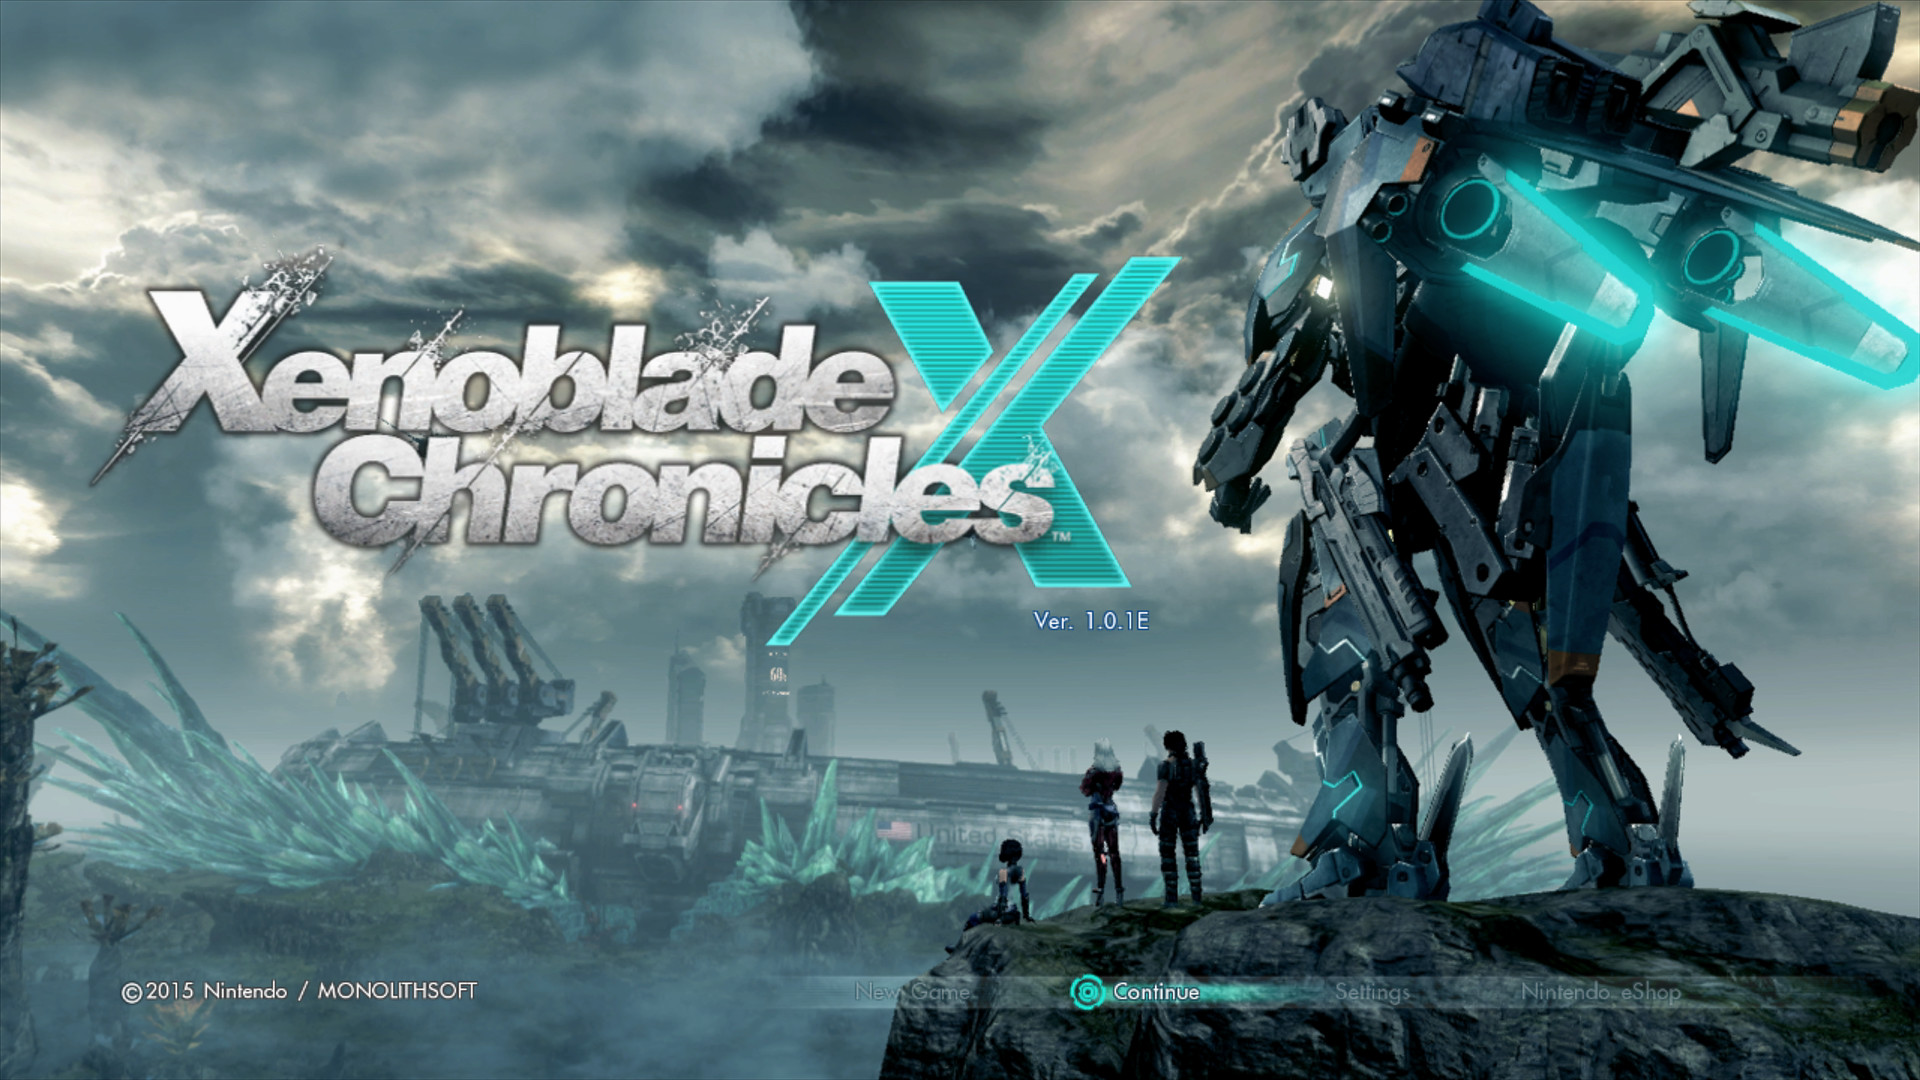 I have been playing Xenoblade Chronicles X, and while it took me a while to get into it, I’m actually having a great time with the game. Yes, it definitely shows its age, but it’s great.